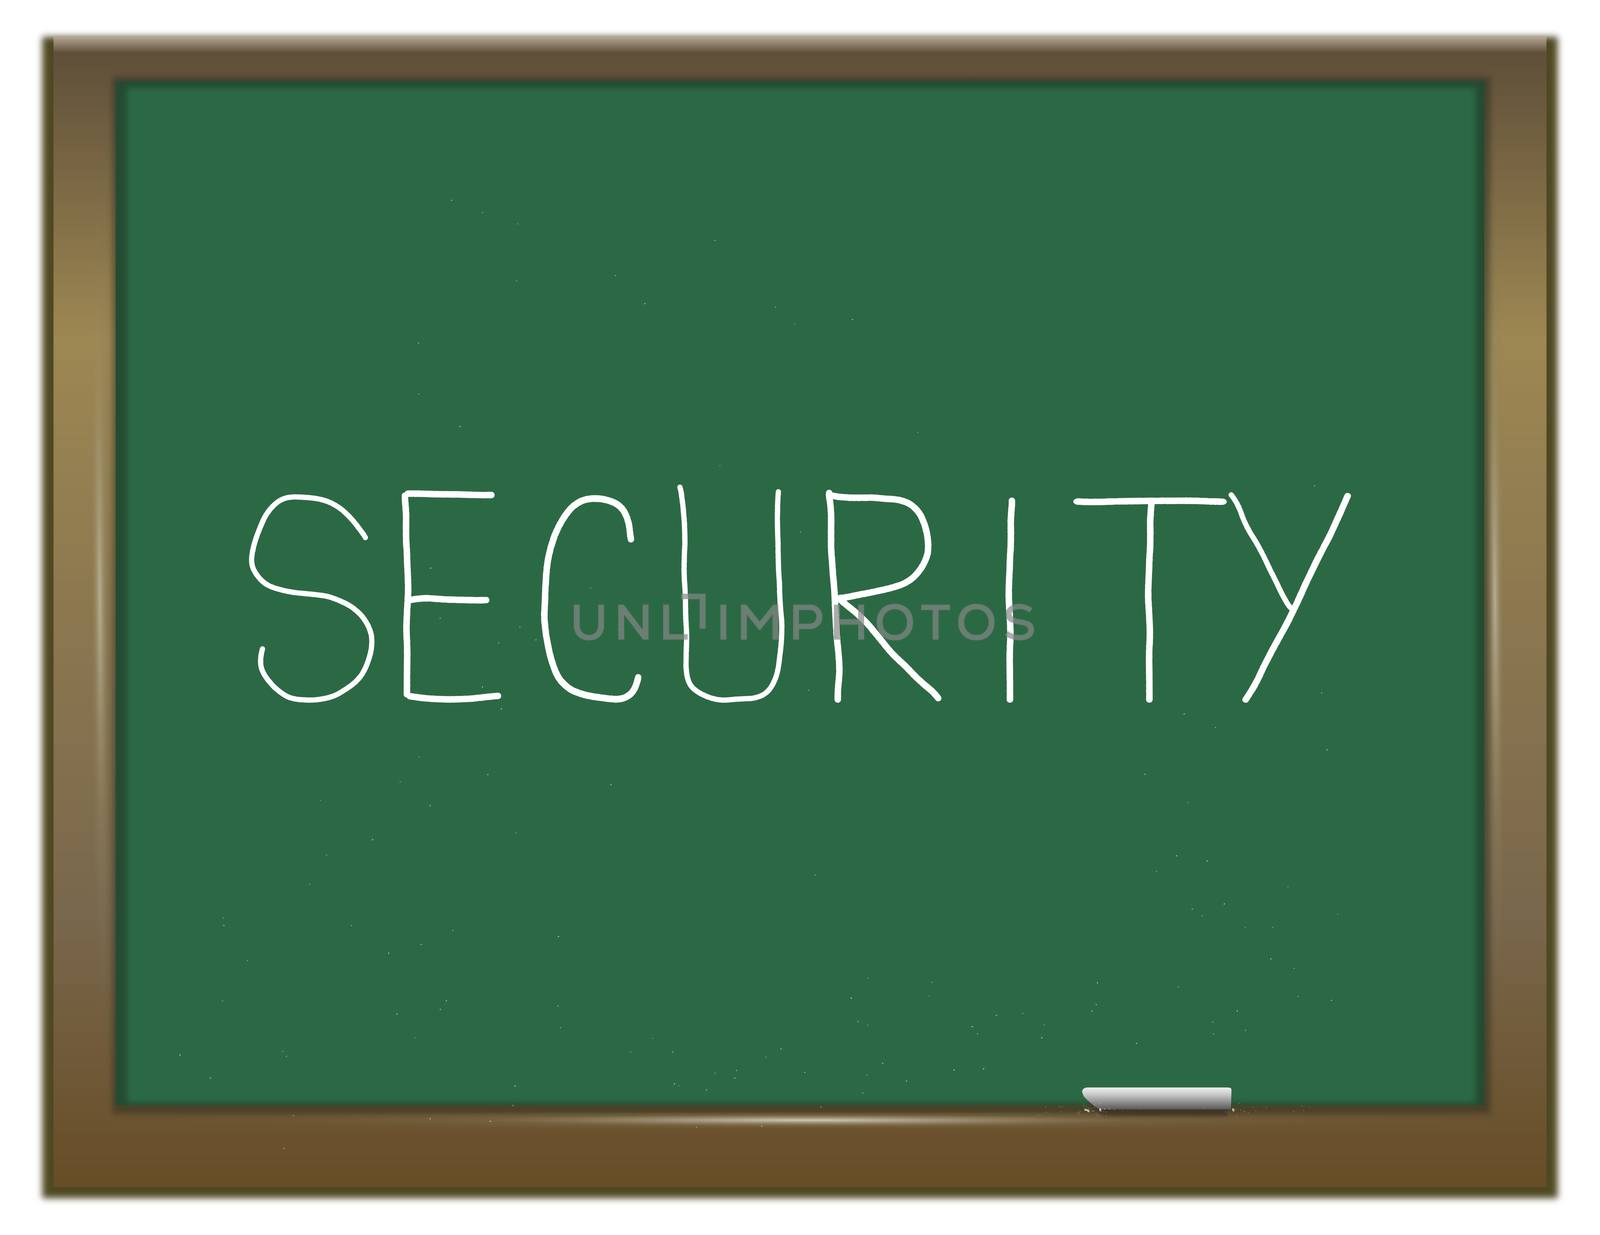 Illustration depicting a green chalkboard with a security concept.